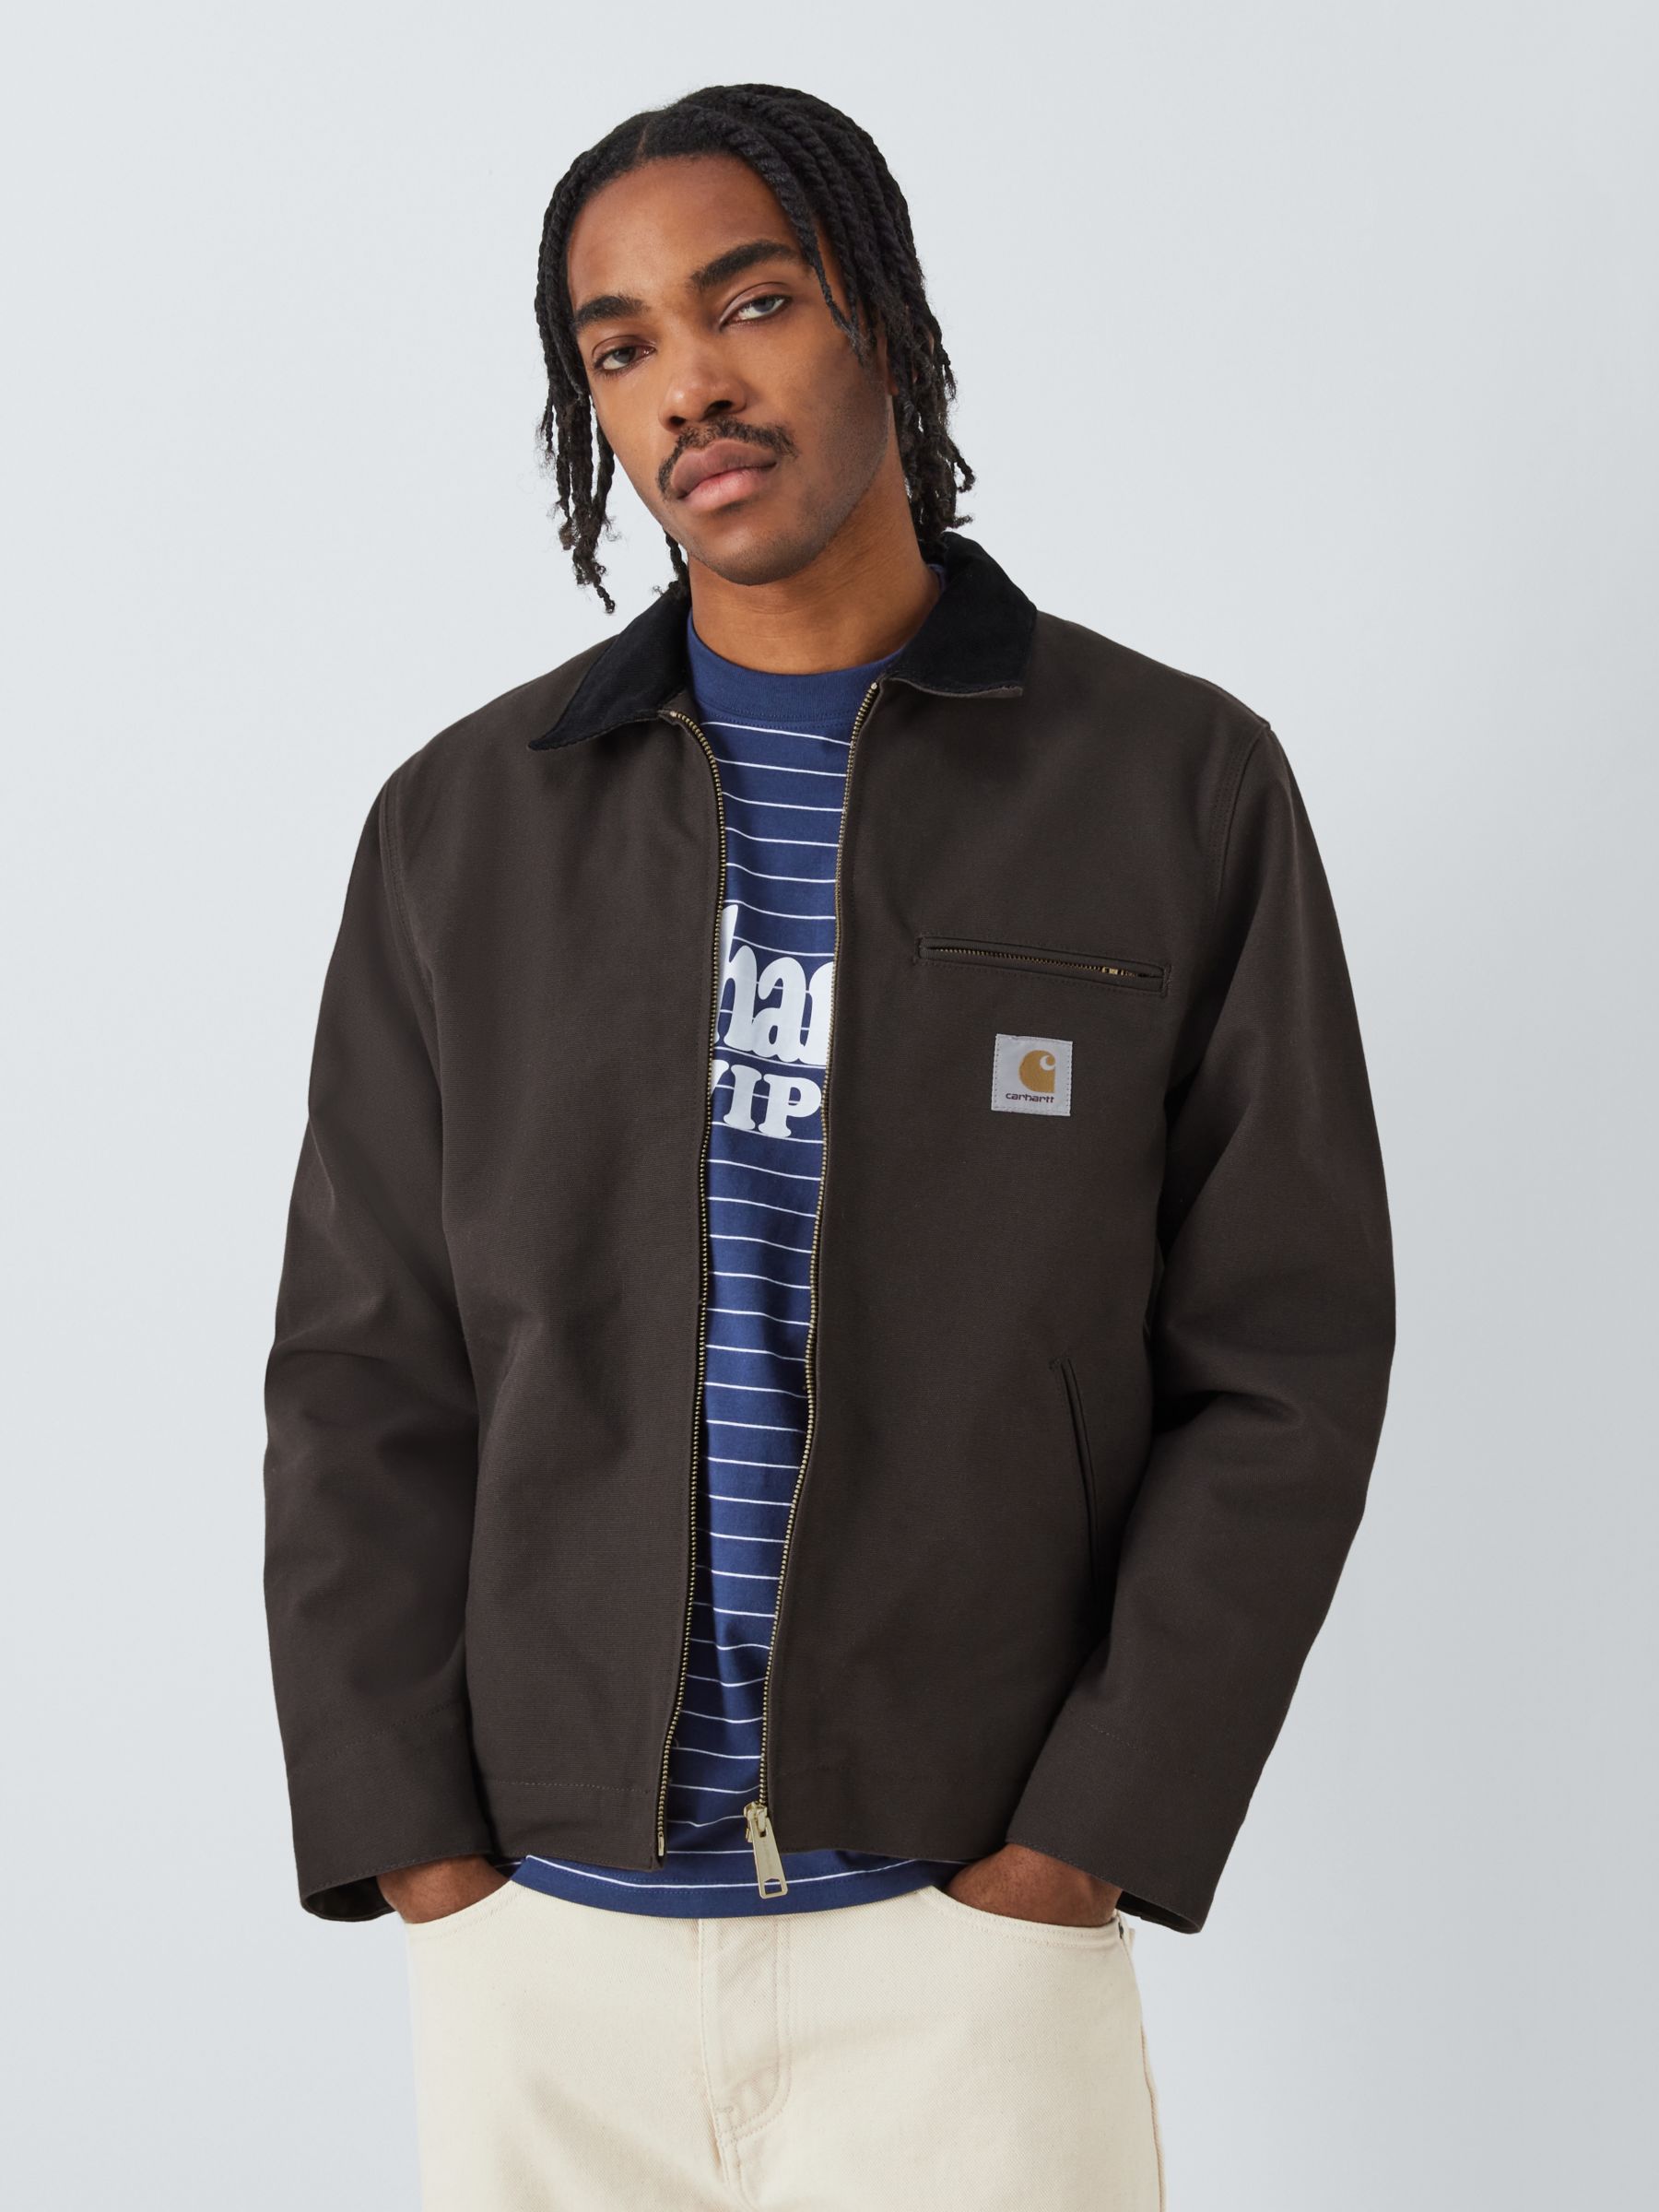 Carhartt is offering up to 50% off winter apparel